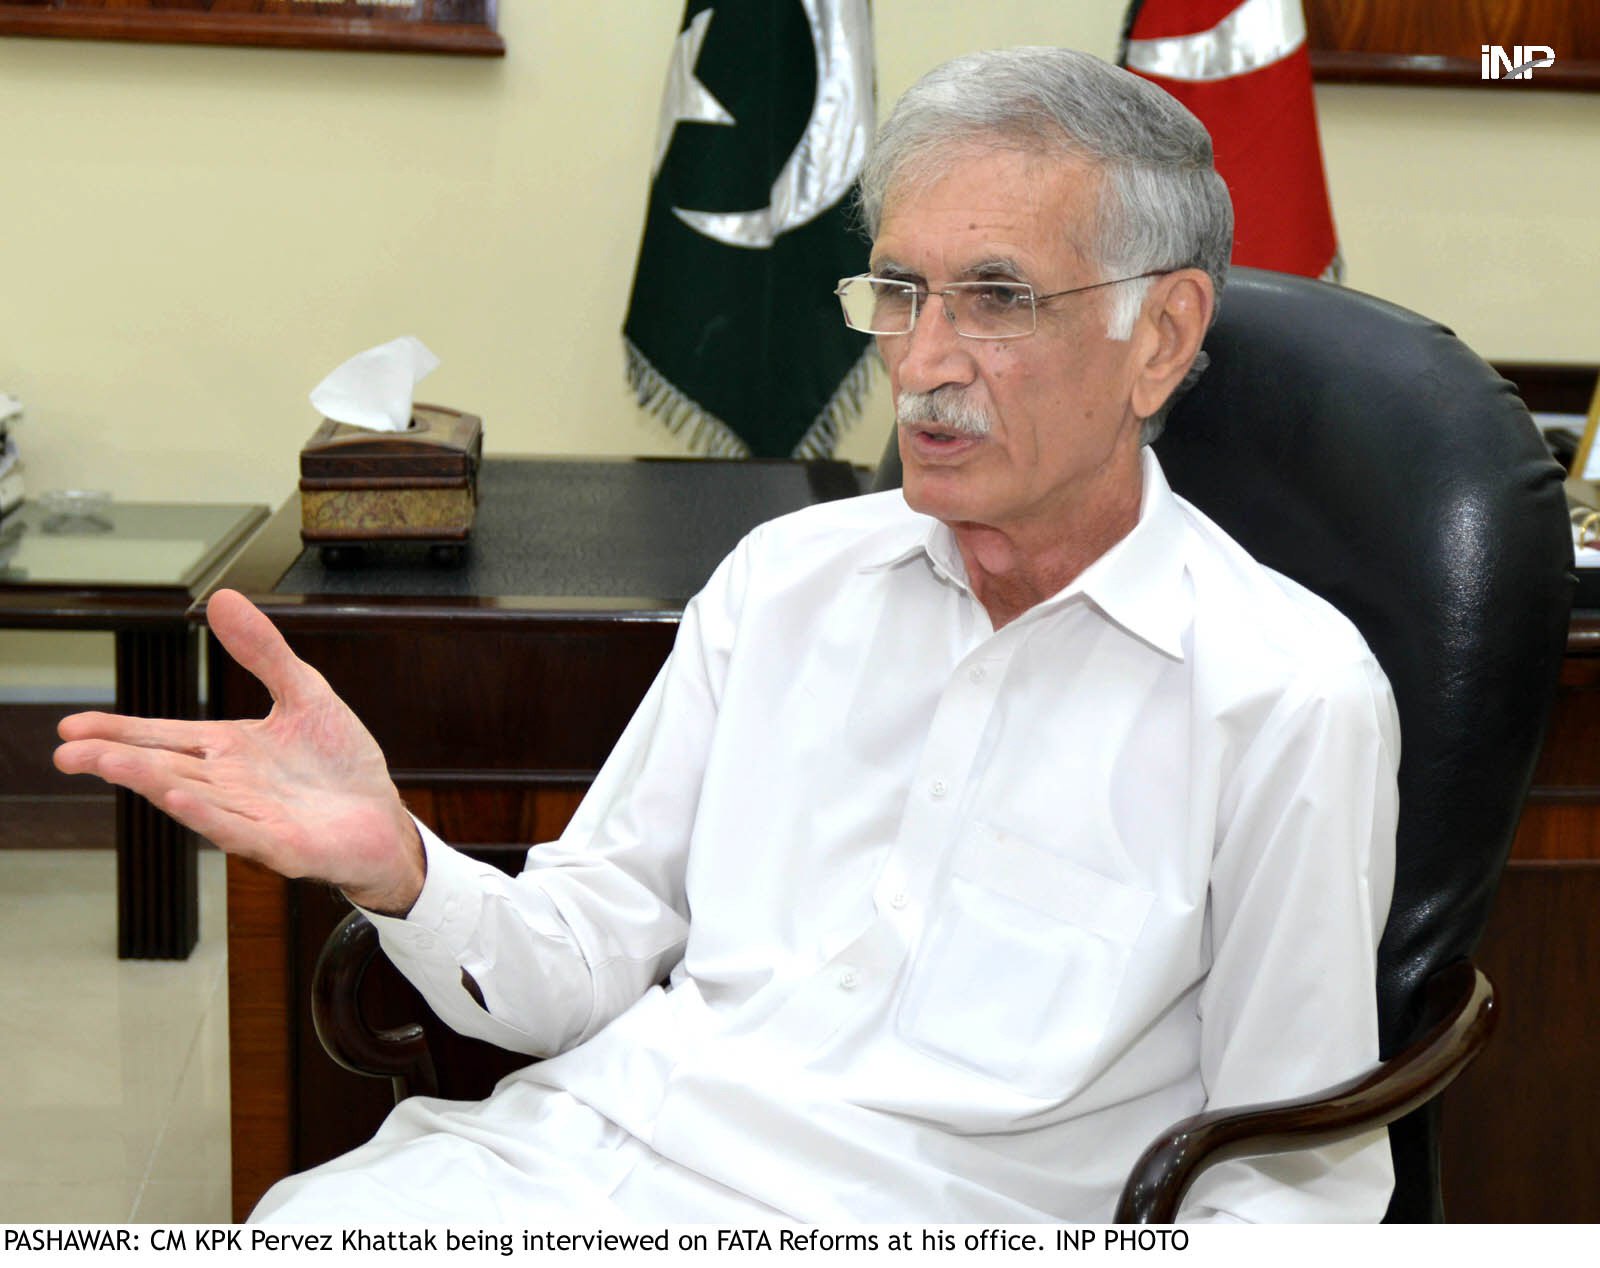 khattak tells gda to get its act together